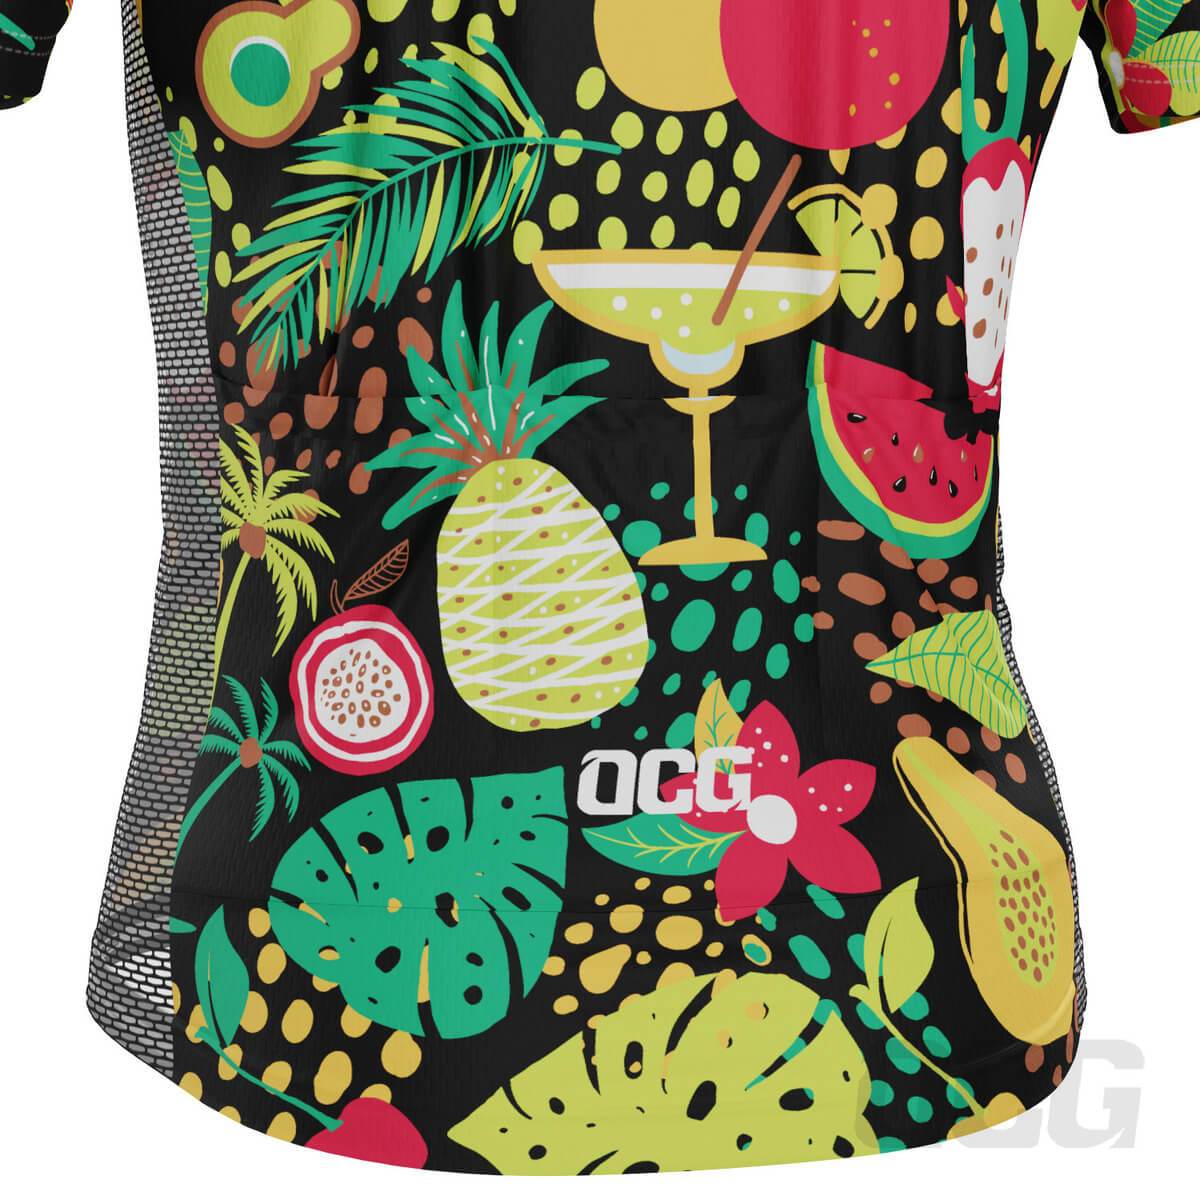 Men's Fruit Cocktail Short Sleeve Cycling Jersey